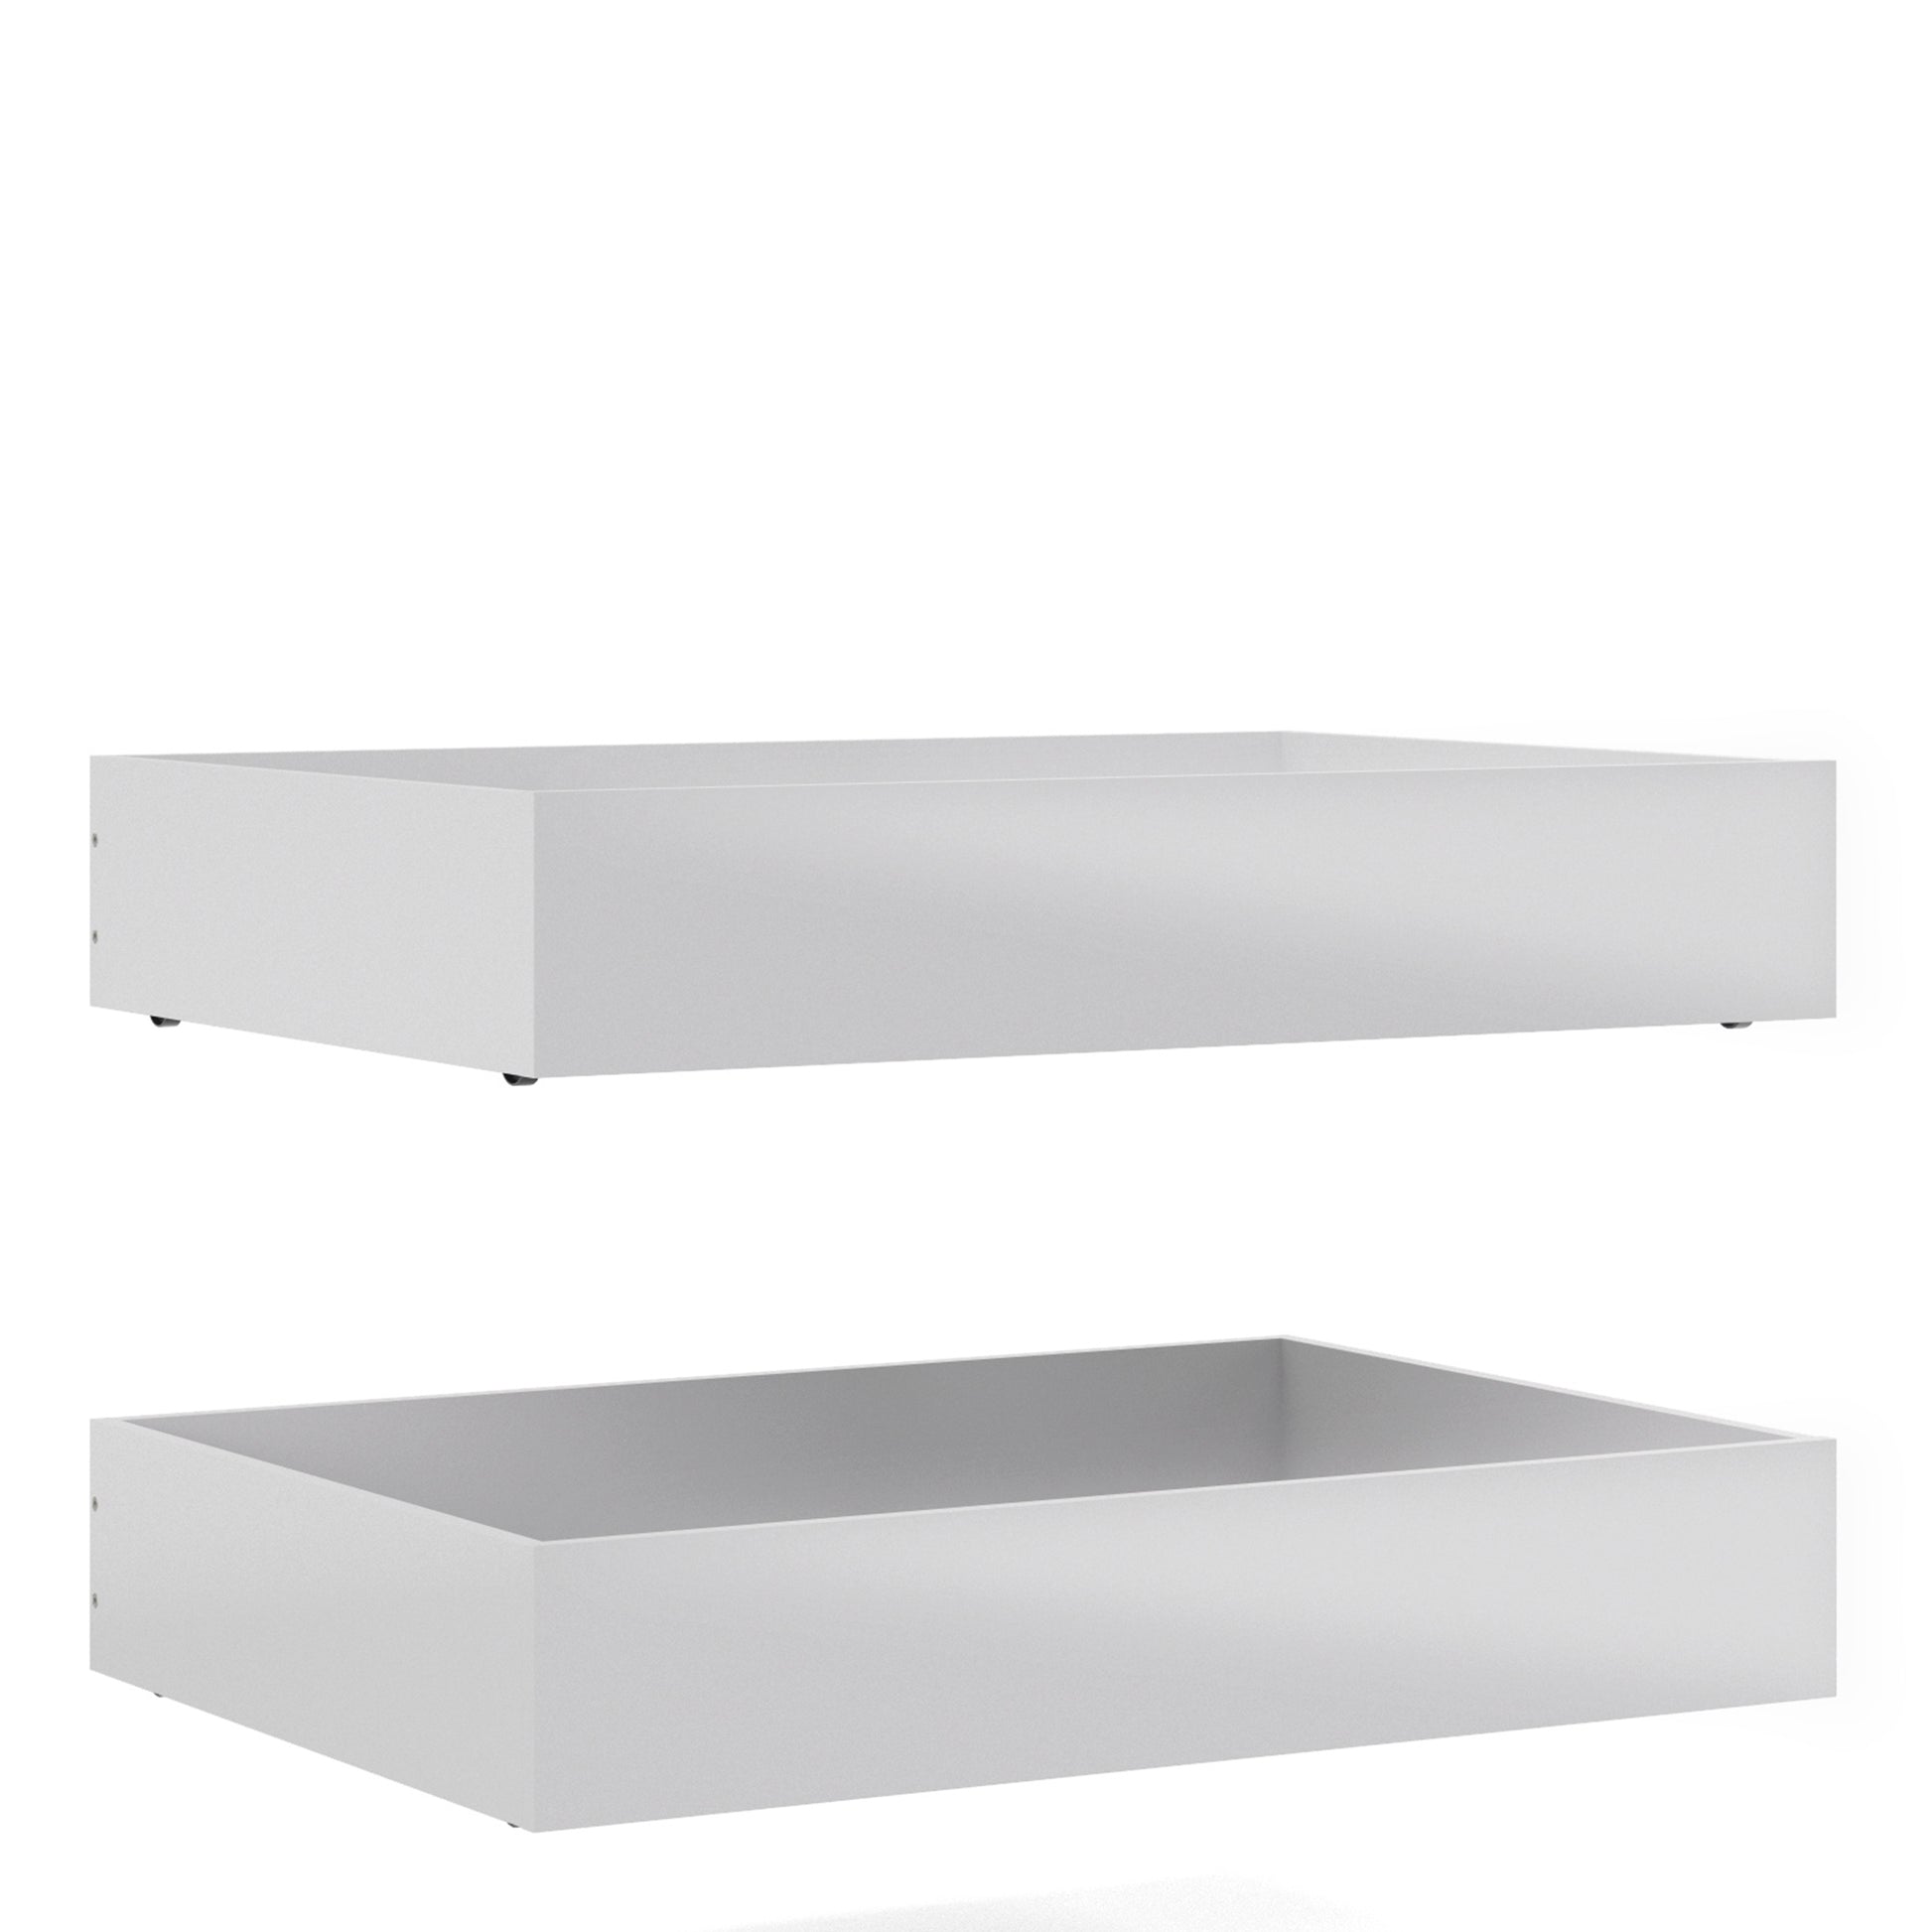 Naia  Set of 2 Underbed Drawers (for Single or Double beds) in White High Gloss